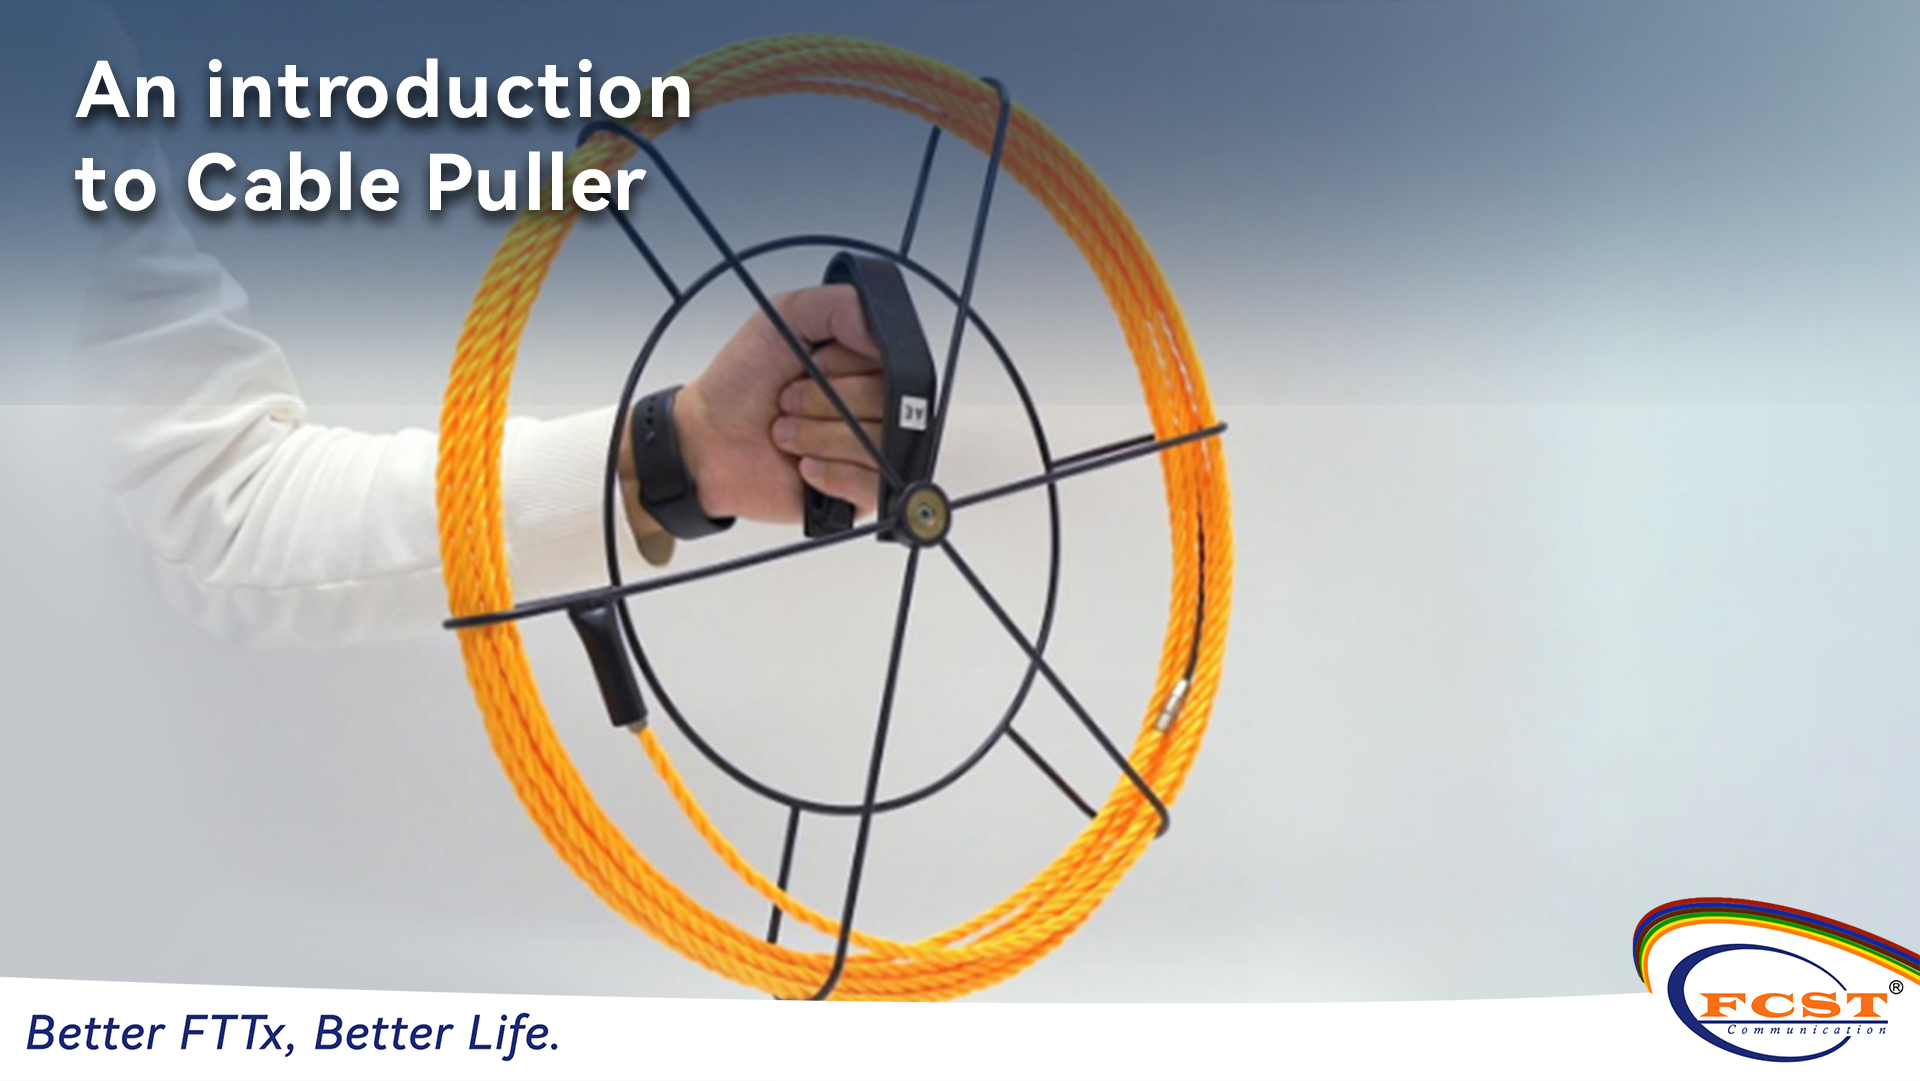 An introduction to Cable Puller